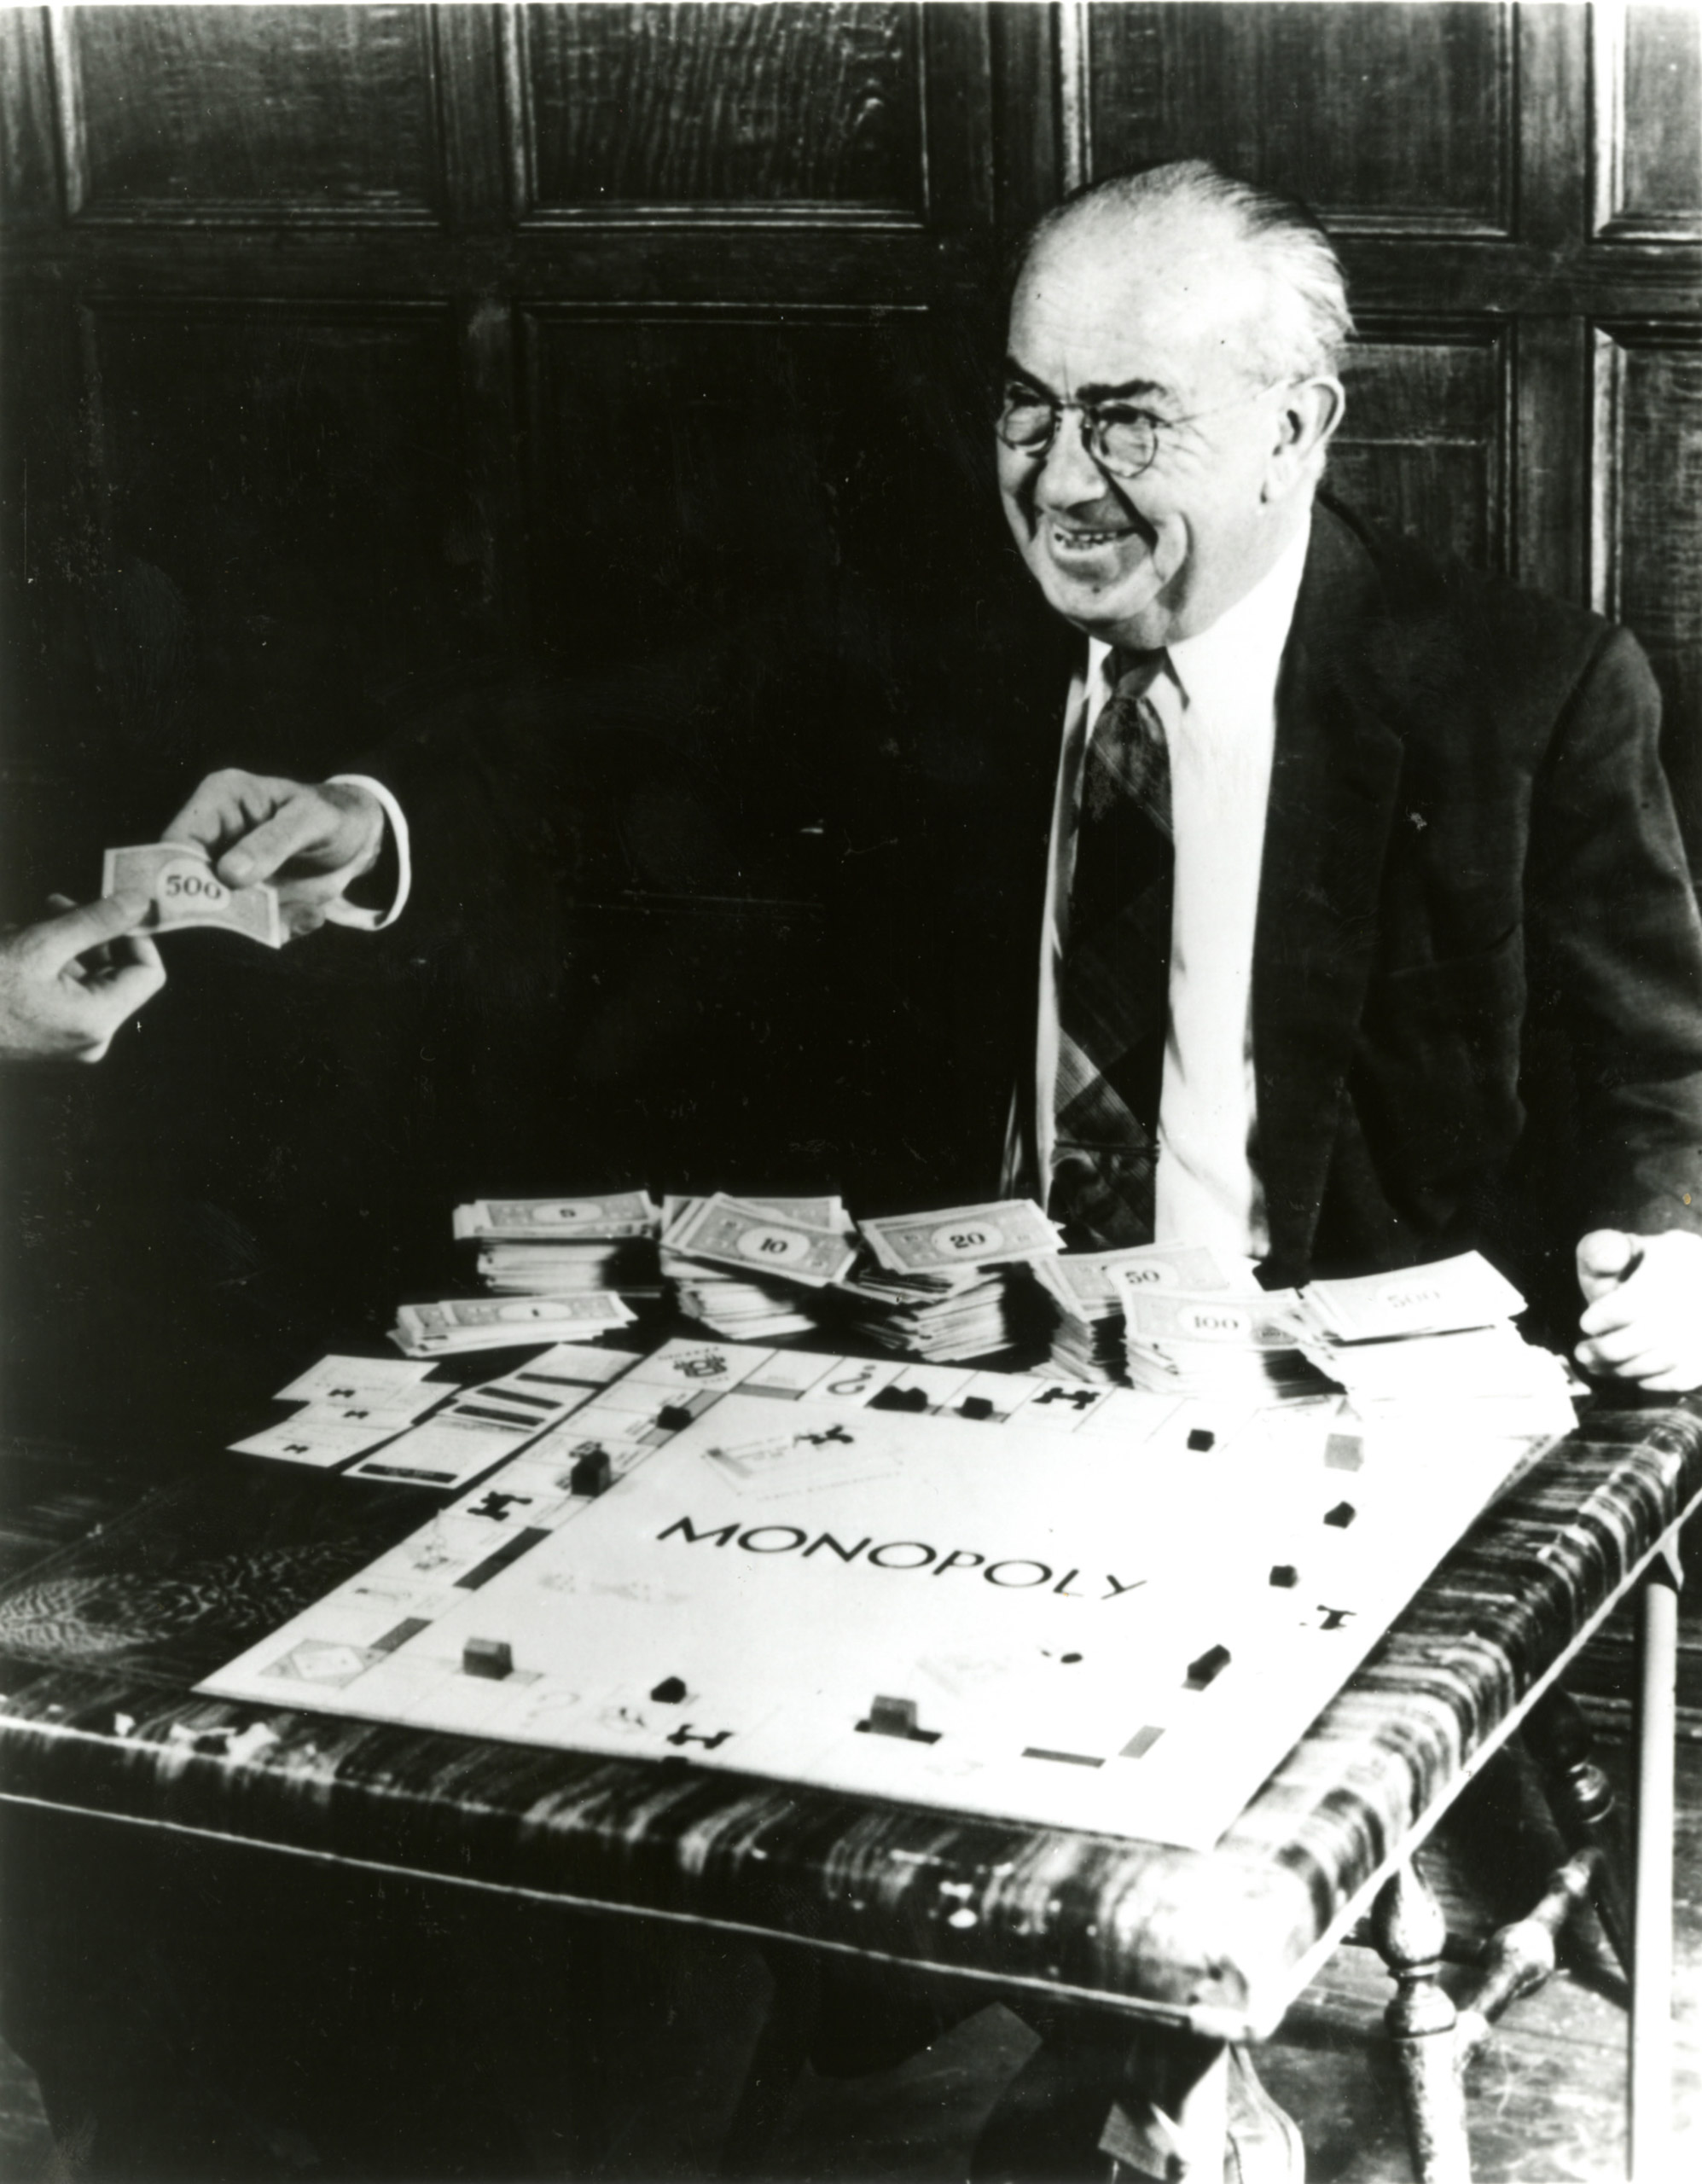 Charles Darrow, inventor of the Monopoly board game.